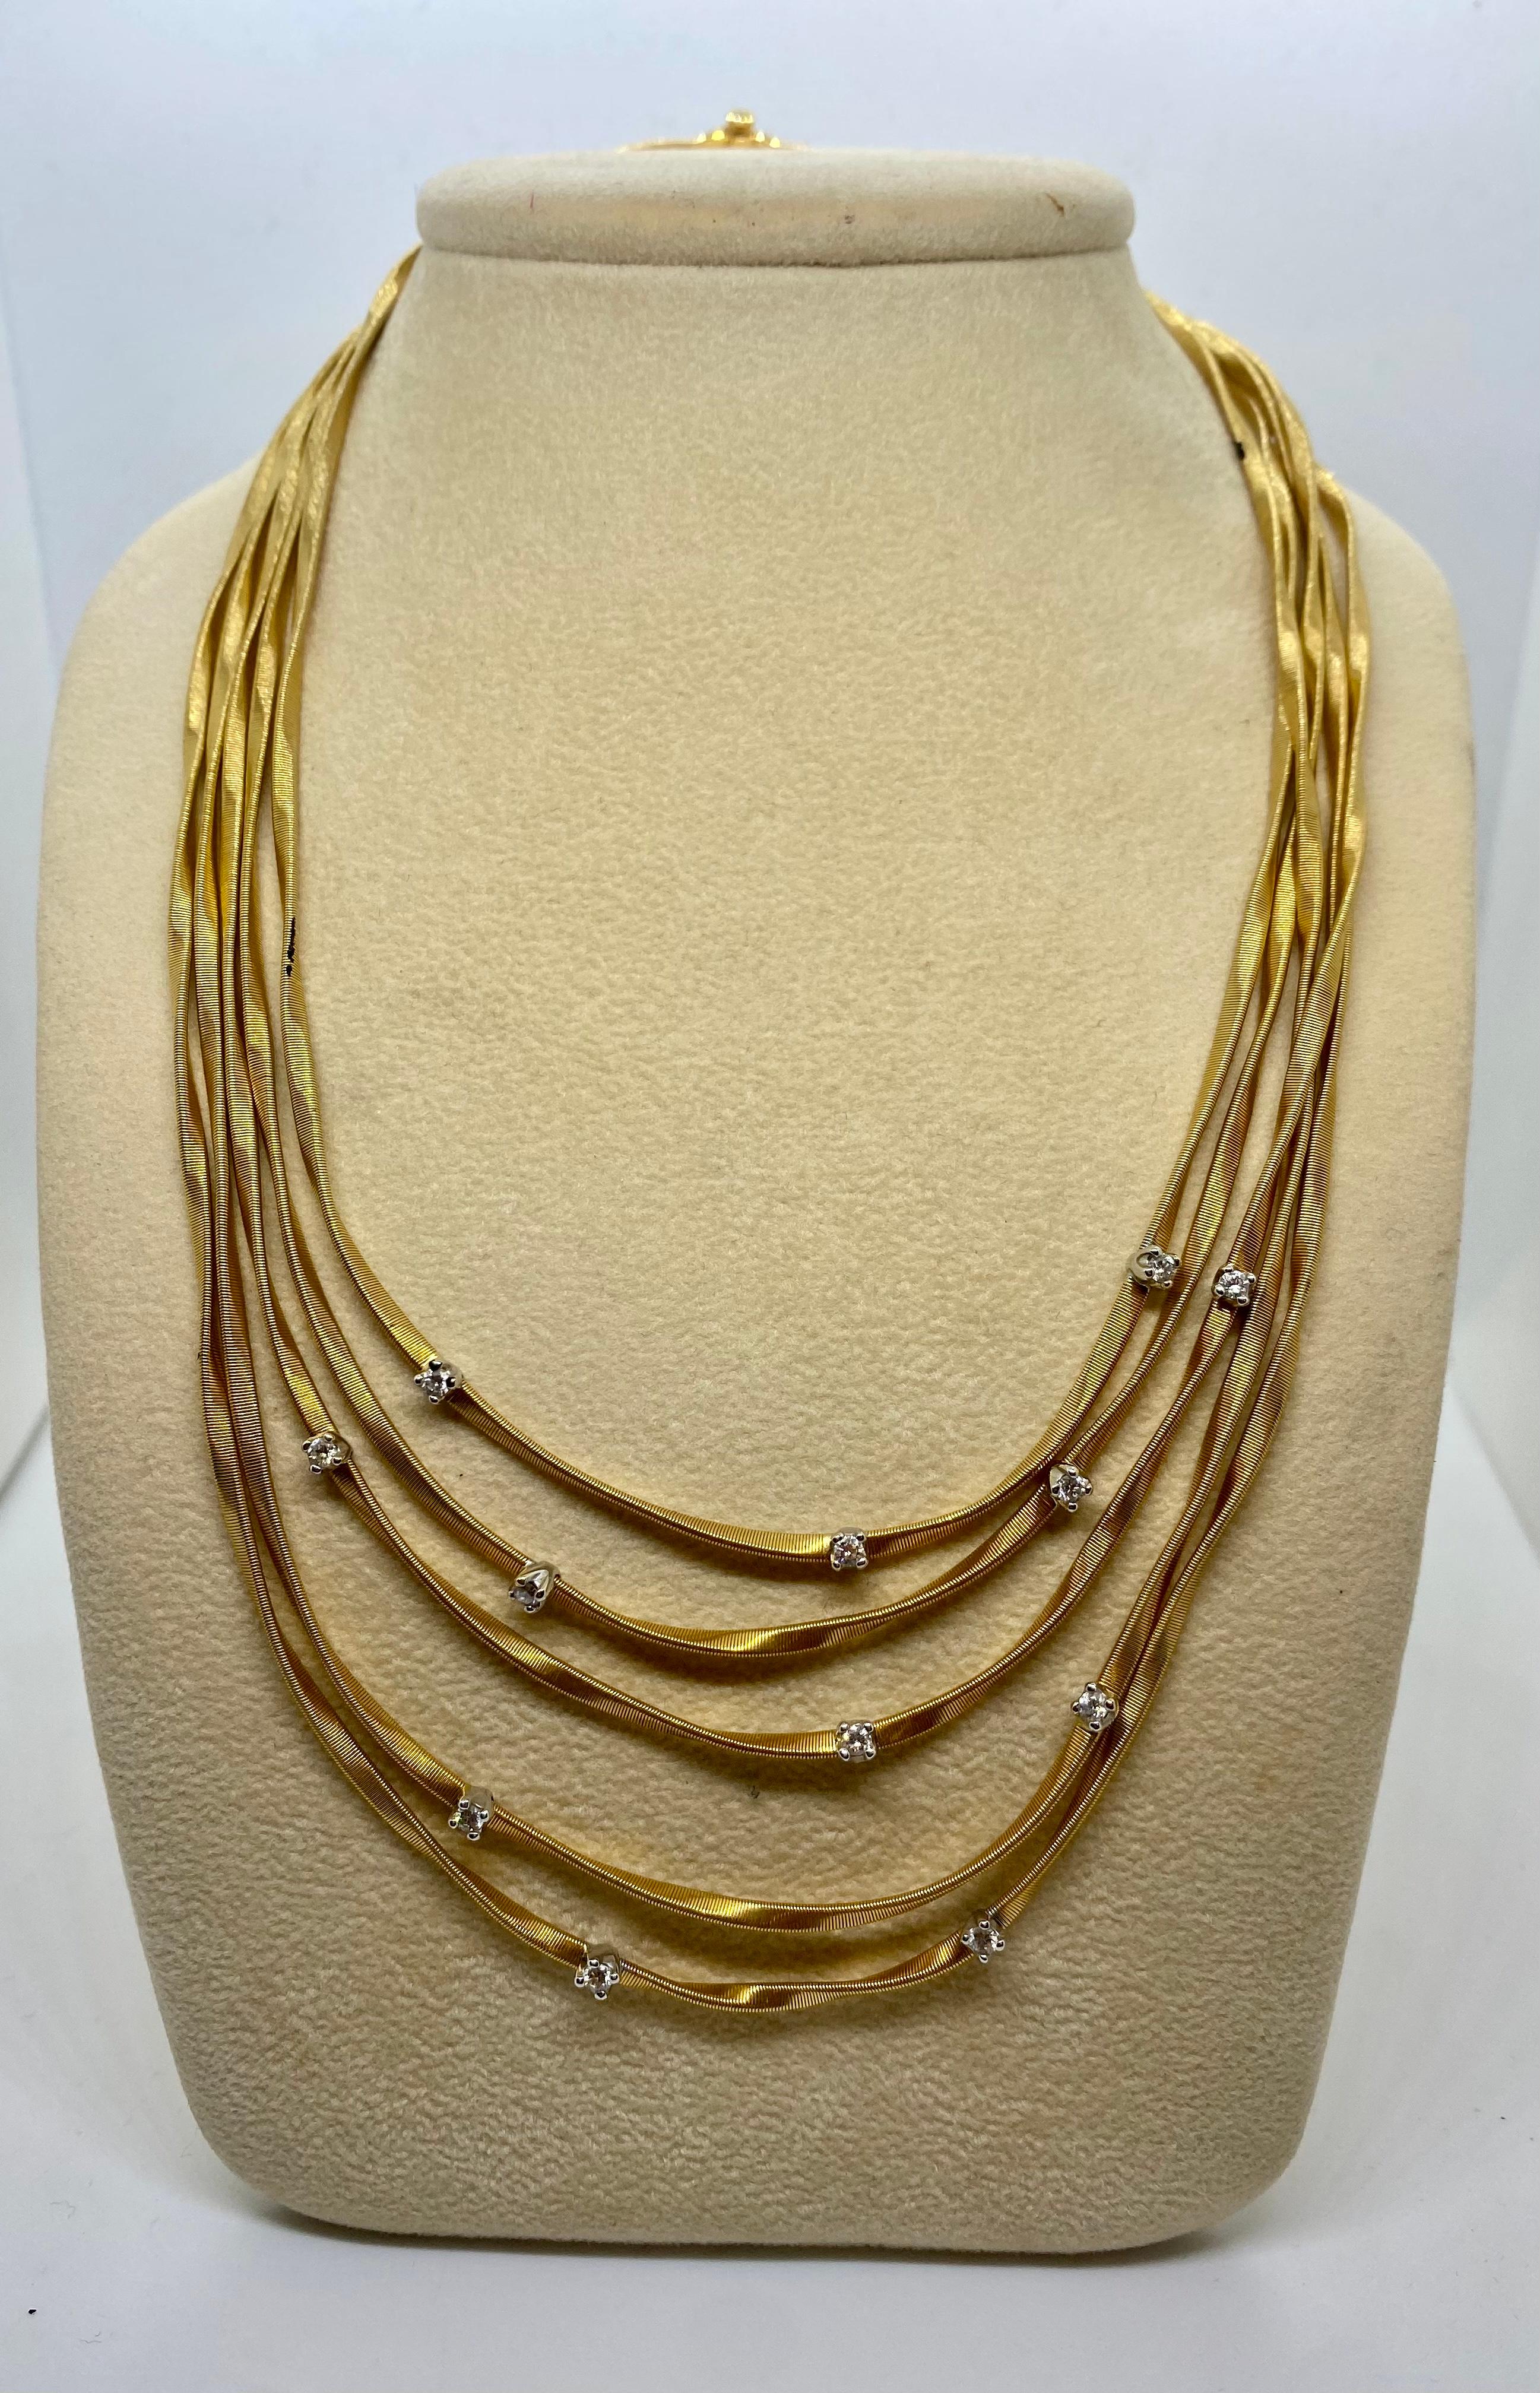 Women's or Men's 18 Karat Necklace and Earrings Gold and Diamonds Signed Marco Bicego